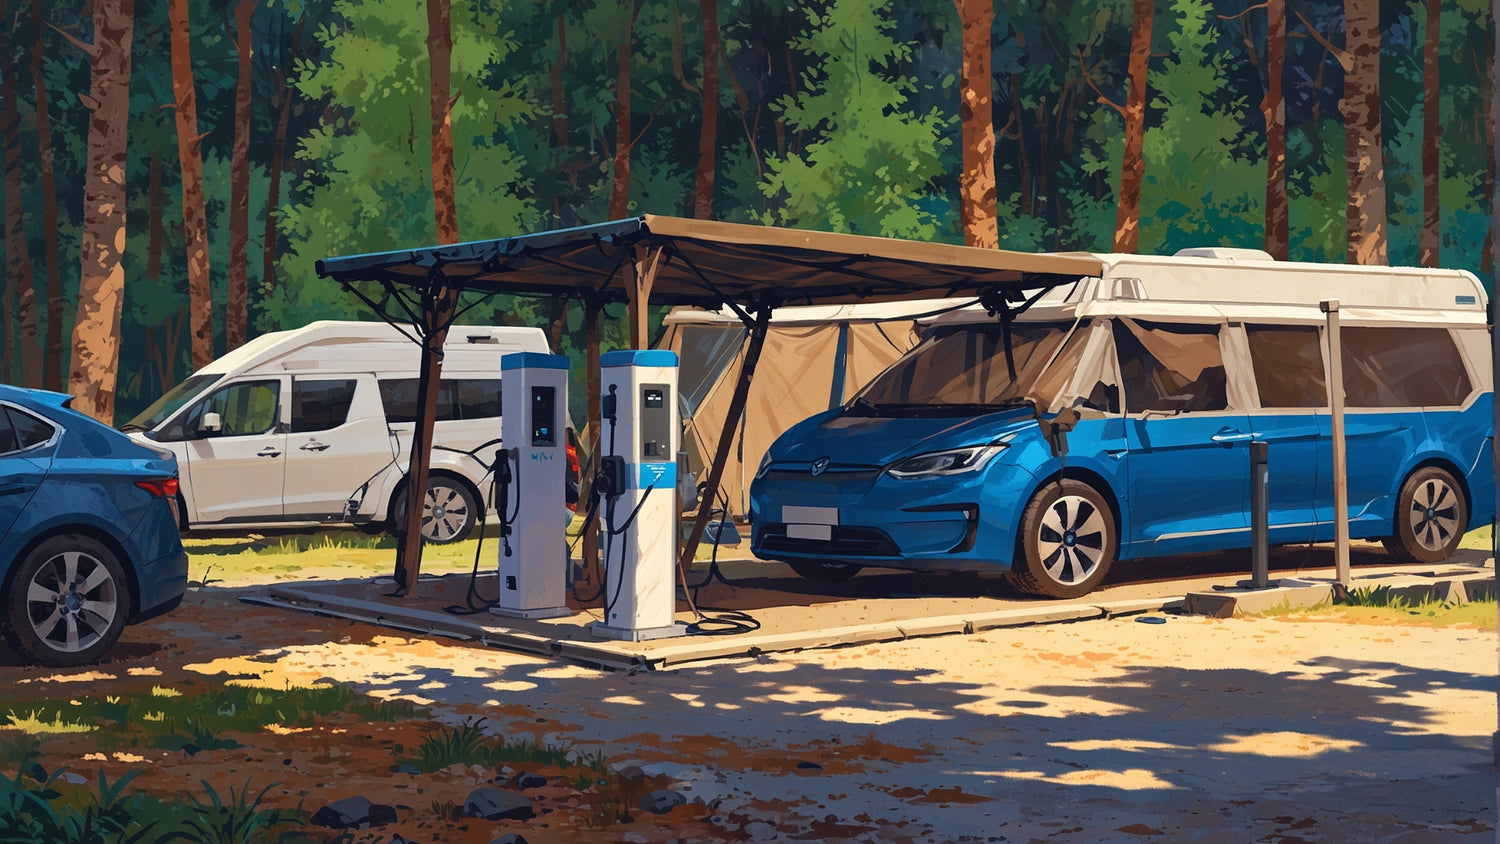 Safely and Efficiently Charge Your Electric Car at the Campsite